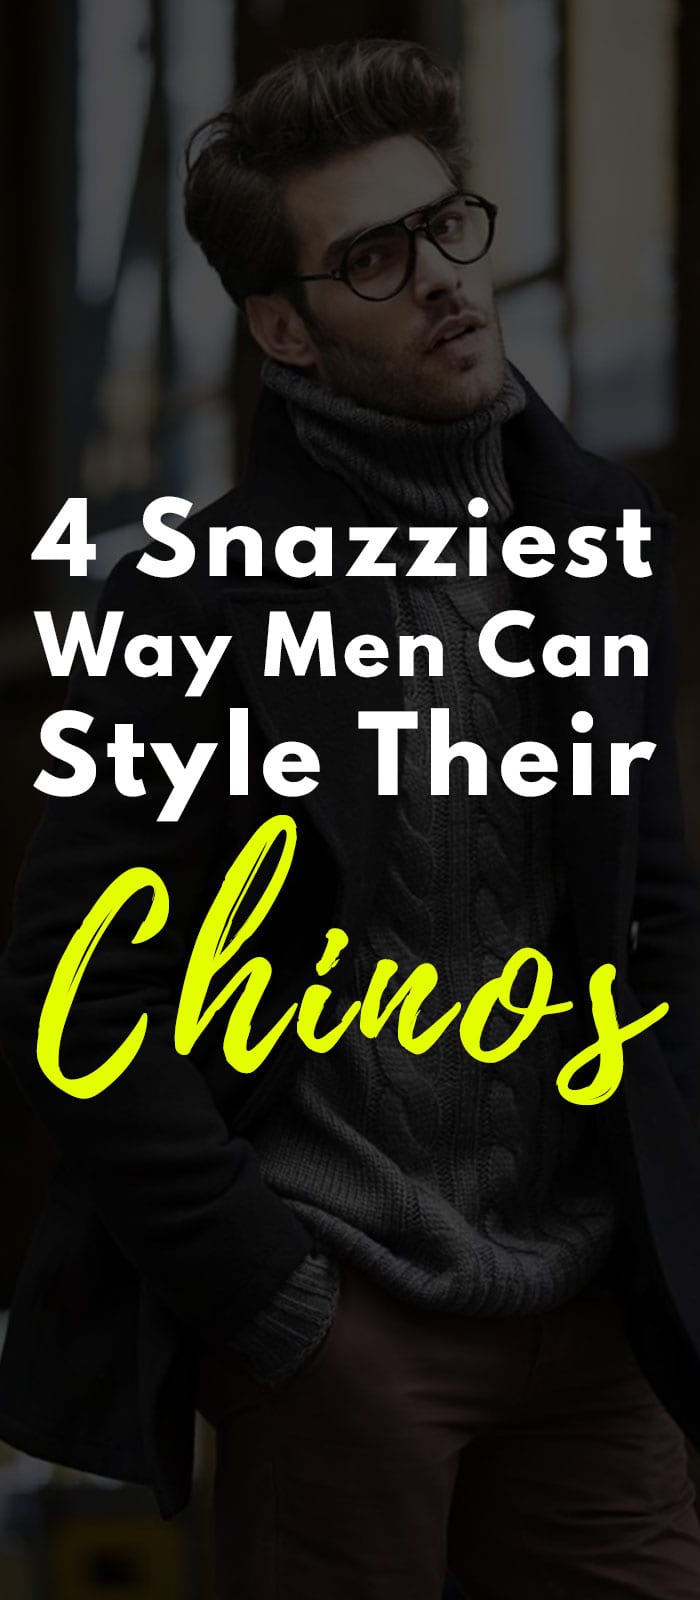 5 Ways Men Can Style Their Chinos